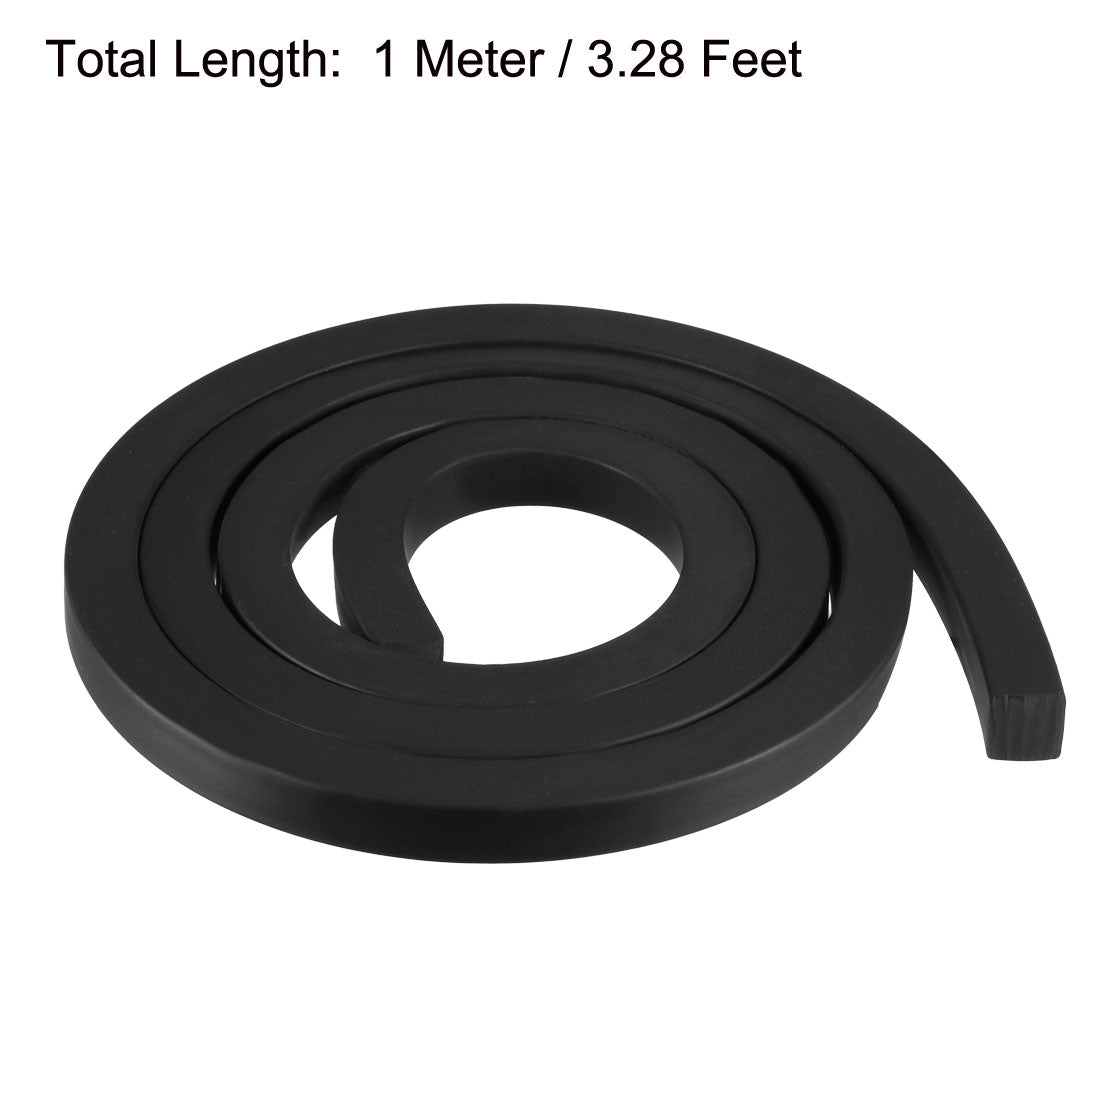 uxcell Uxcell Solid Rectangle Rubber Seal Strip 10mm Wide 10mm Thick, 1 Meter Long Black